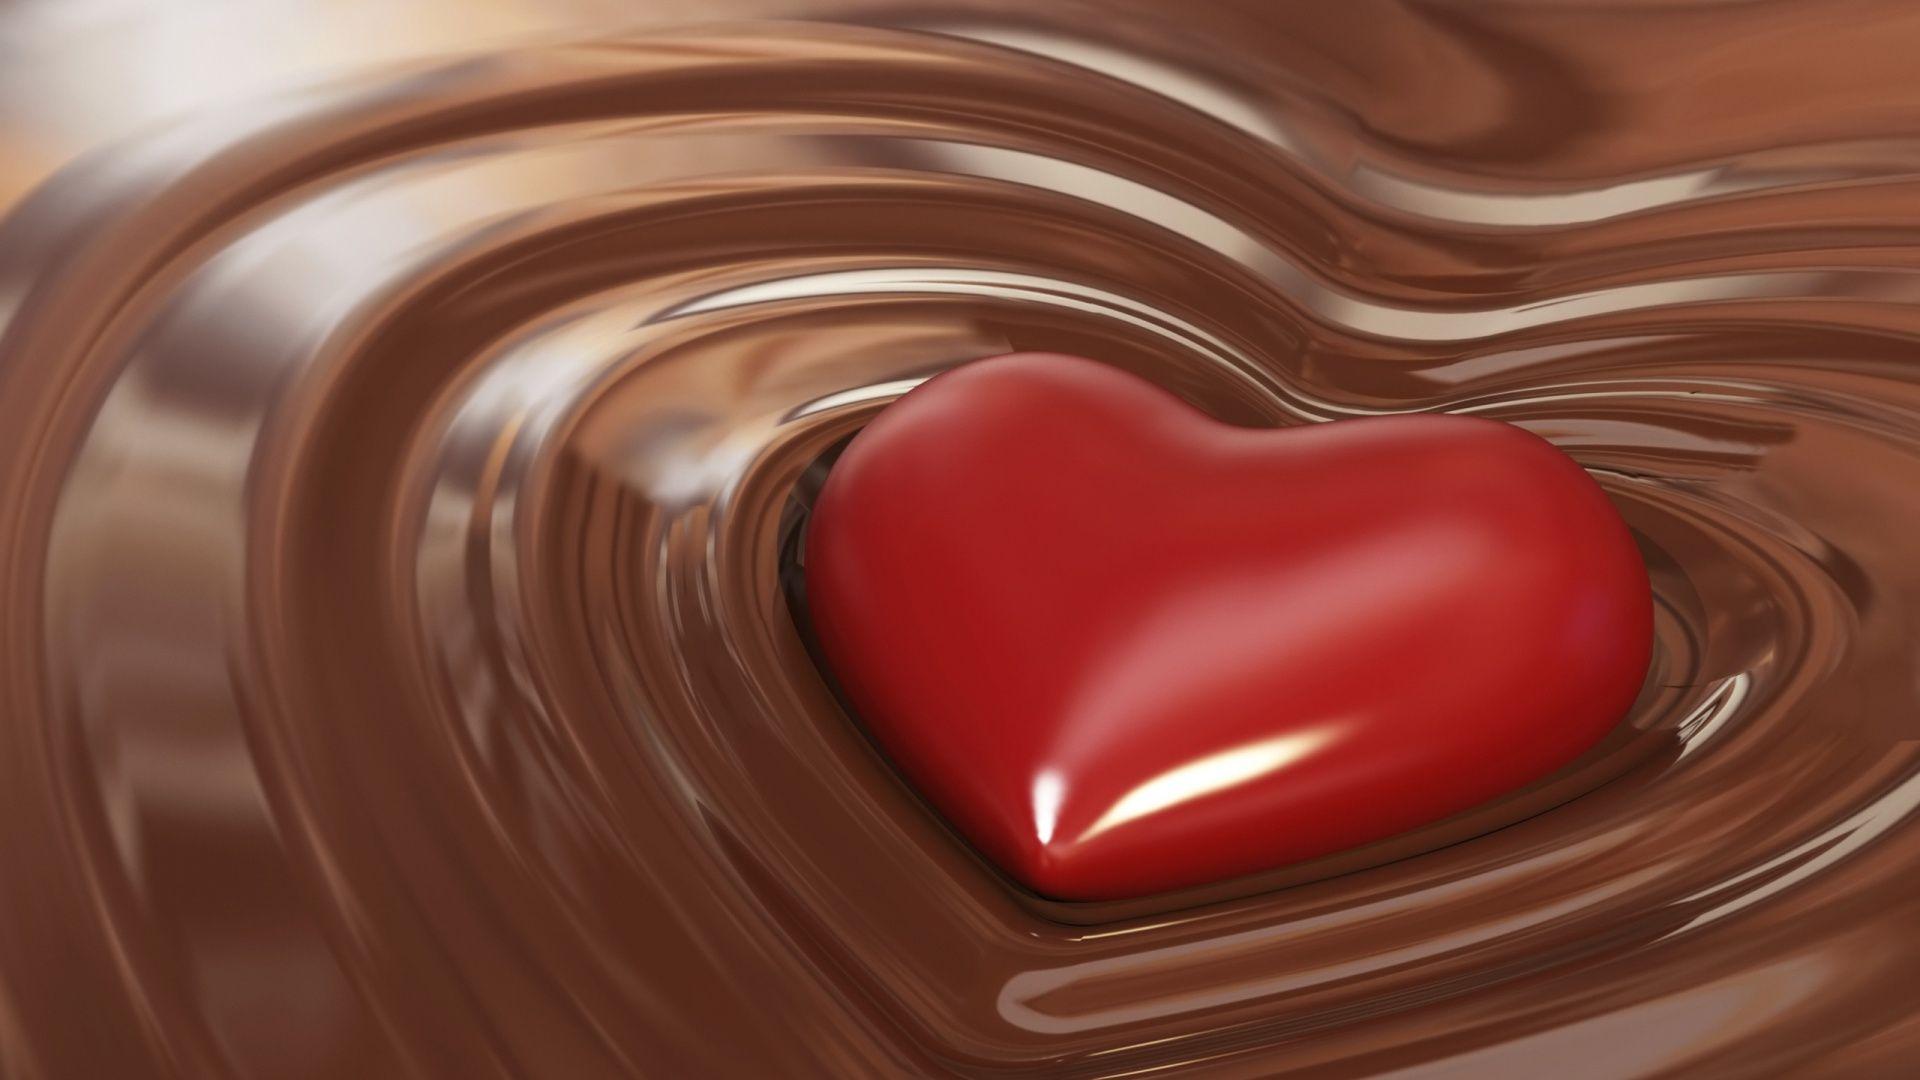 for the LOVE of CHOCOLATE!. I love chocolate, Valentines day chocolates, Chocolate hearts